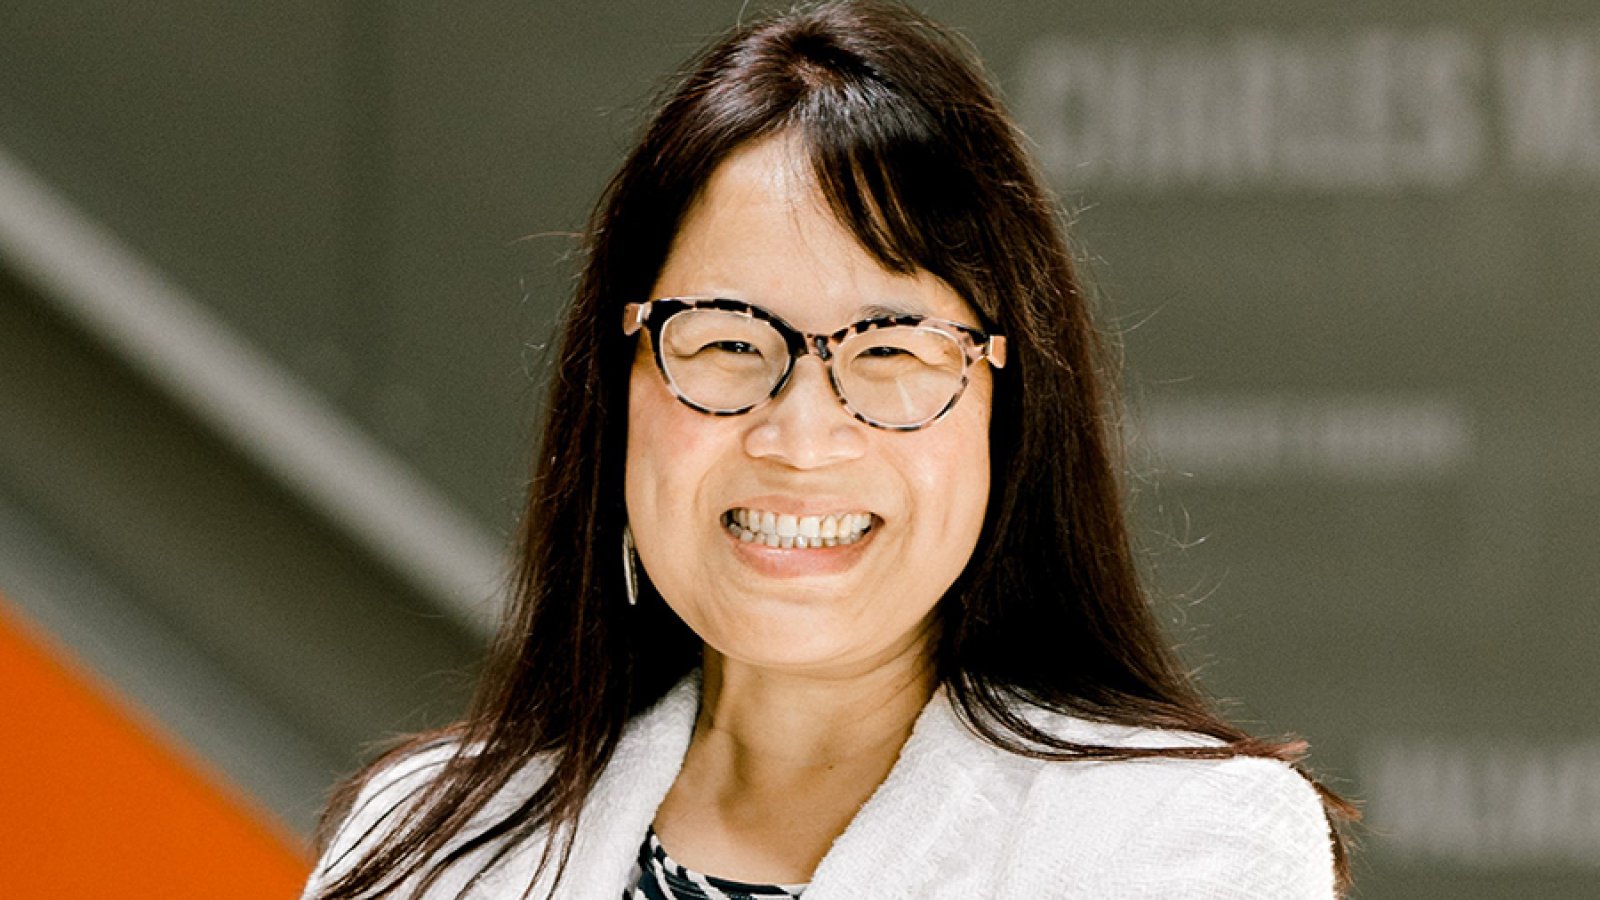 Lily Wang, director of the Durham School of Architectural Engineering and Construction